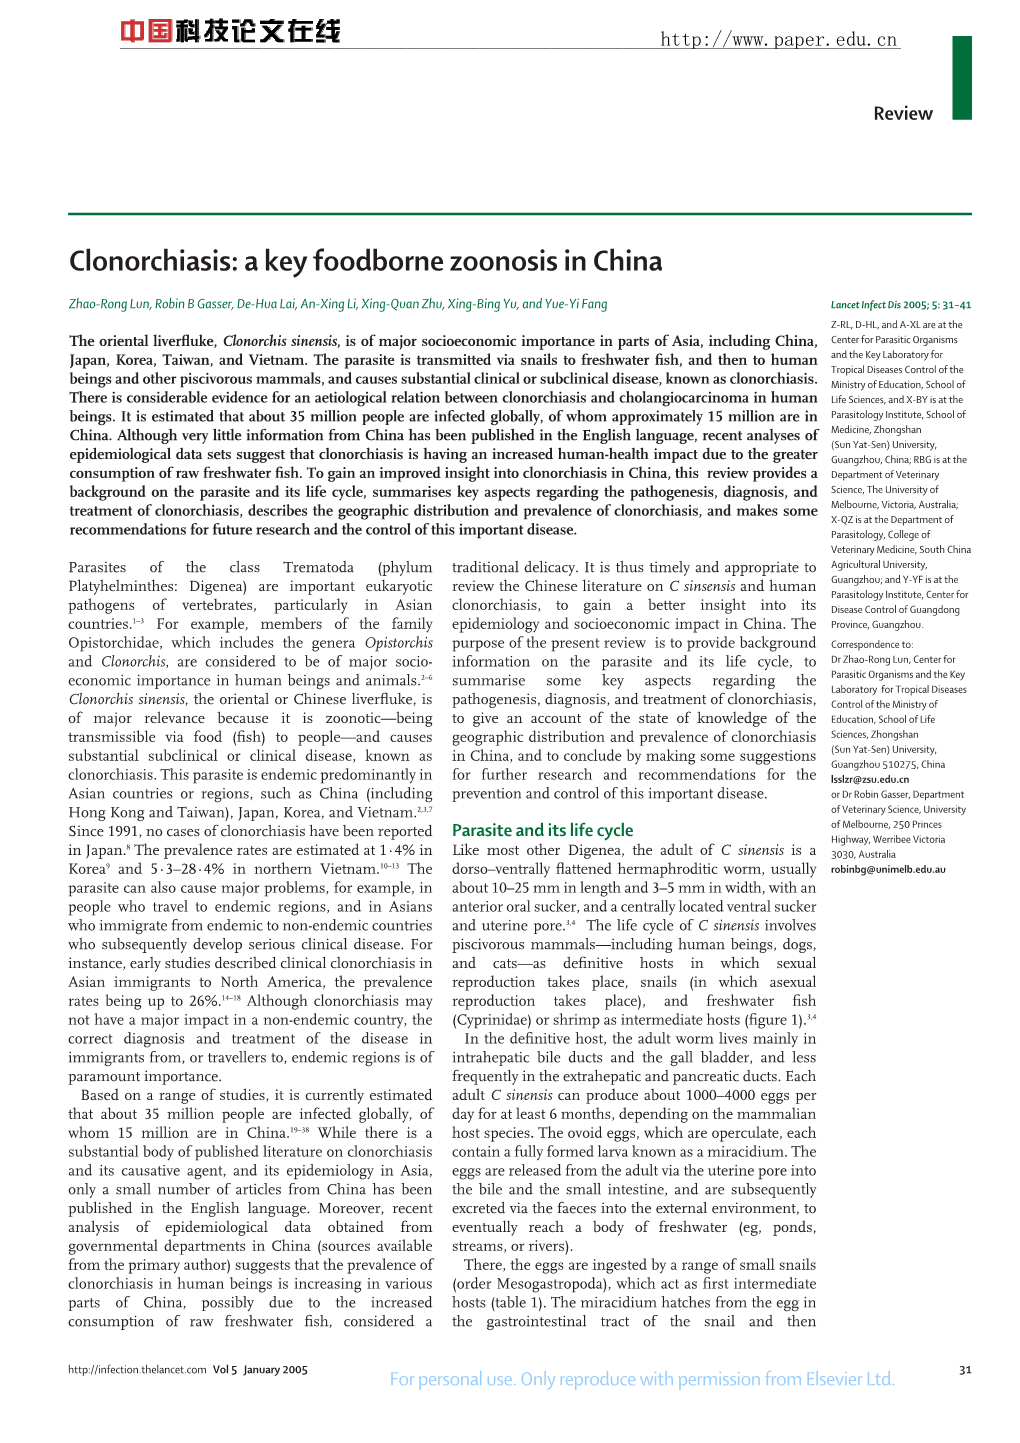 Clonorchiasis: a Key Foodborne Zoonosis in China